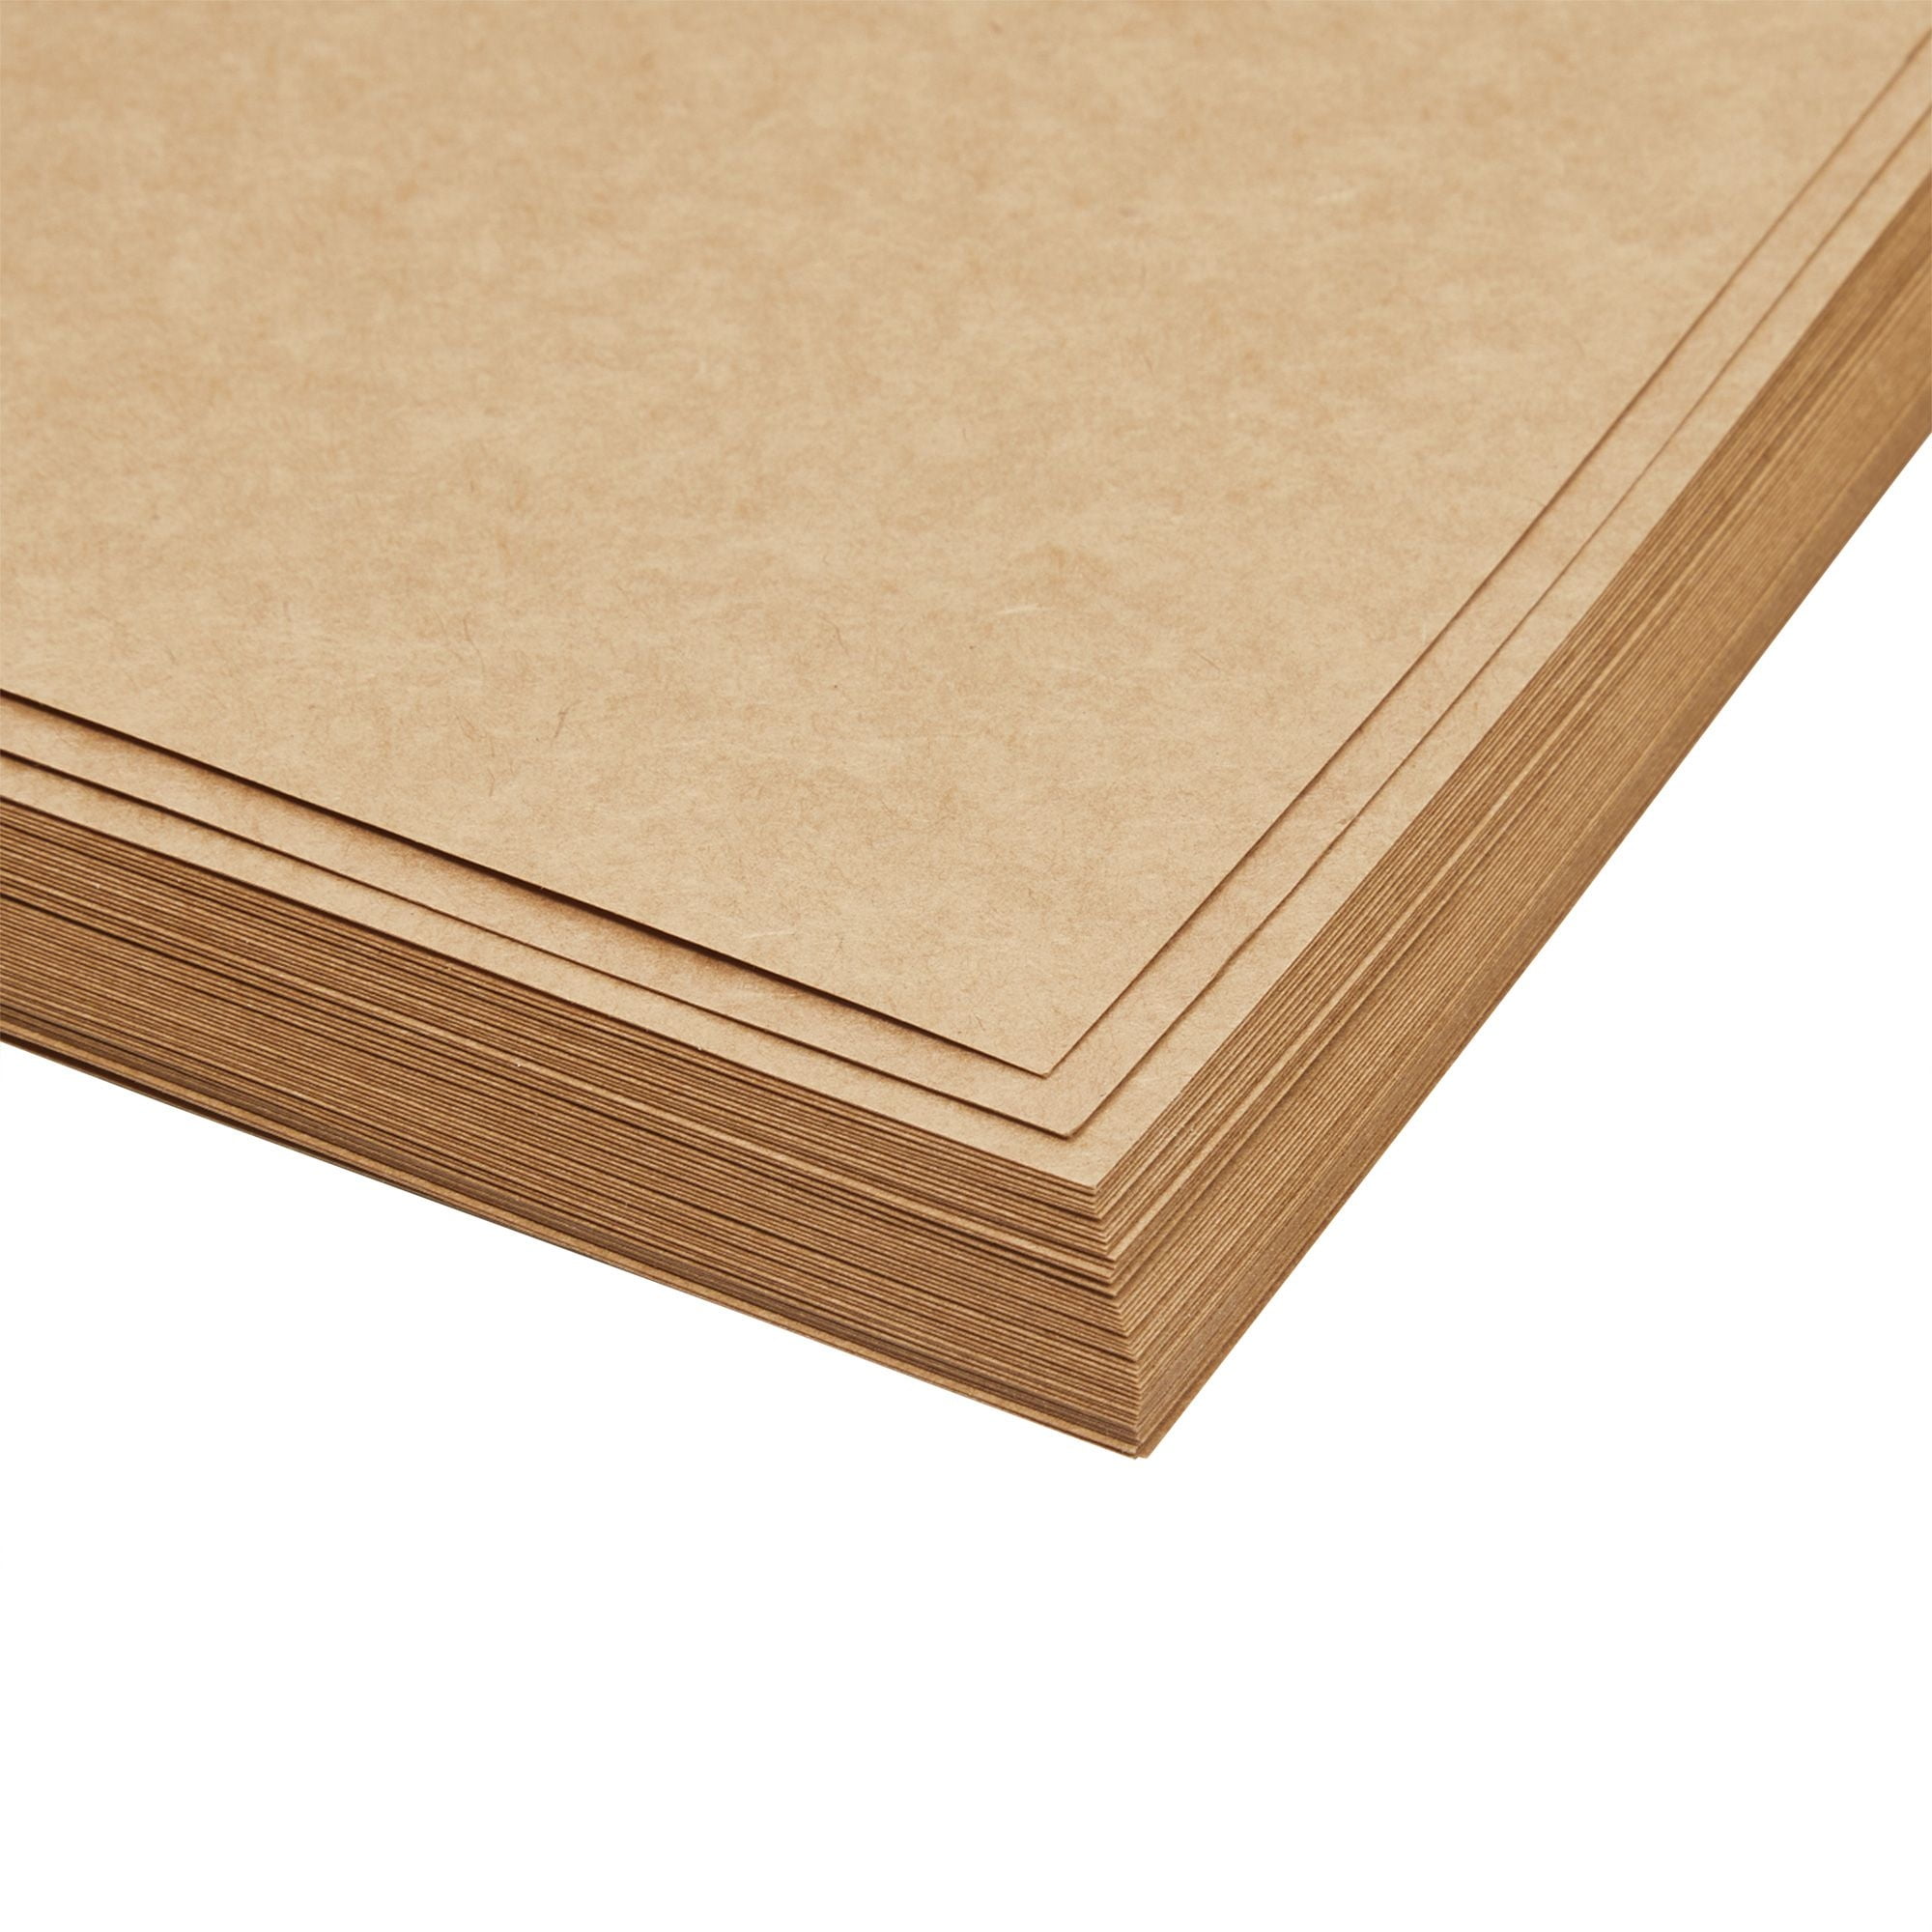 96 Pack Brown Kraft Paper Sheets for Wedding, Party Invitations, Drawing,  DIY Projects, Letter Size, 120gsm (8.5 x 11 In)